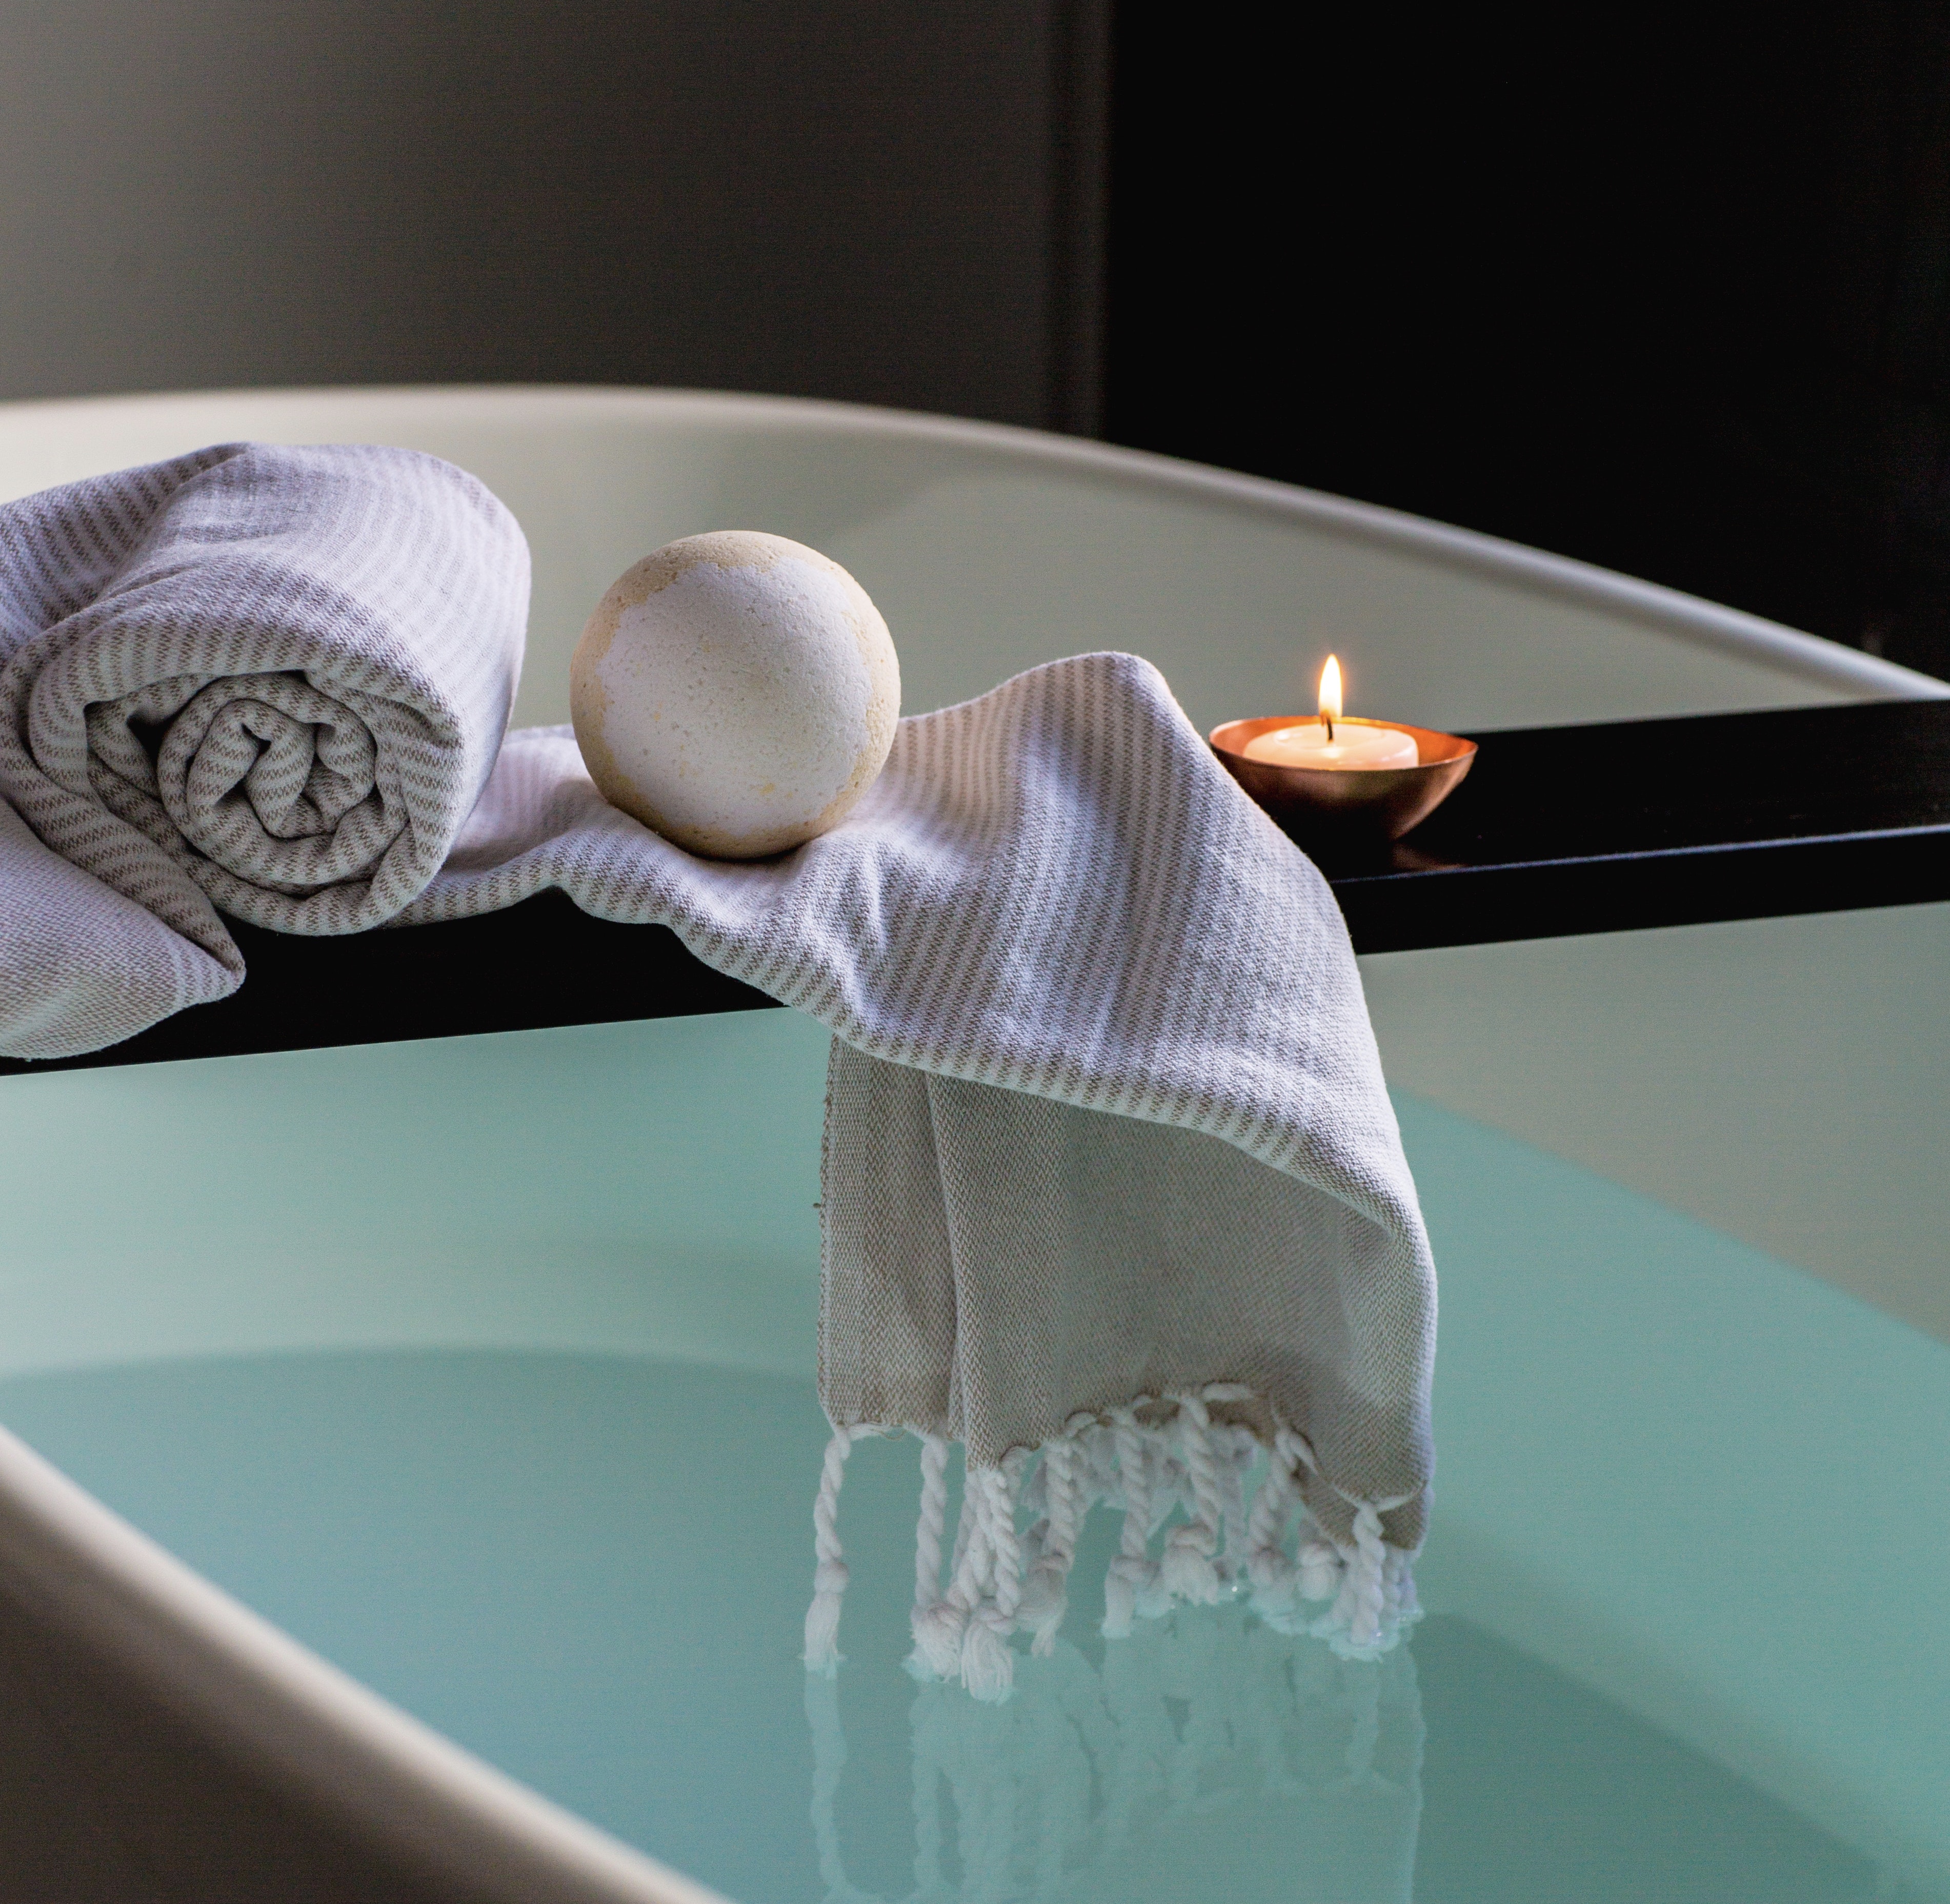 Take a break from stress with these at-home spa day ideas.